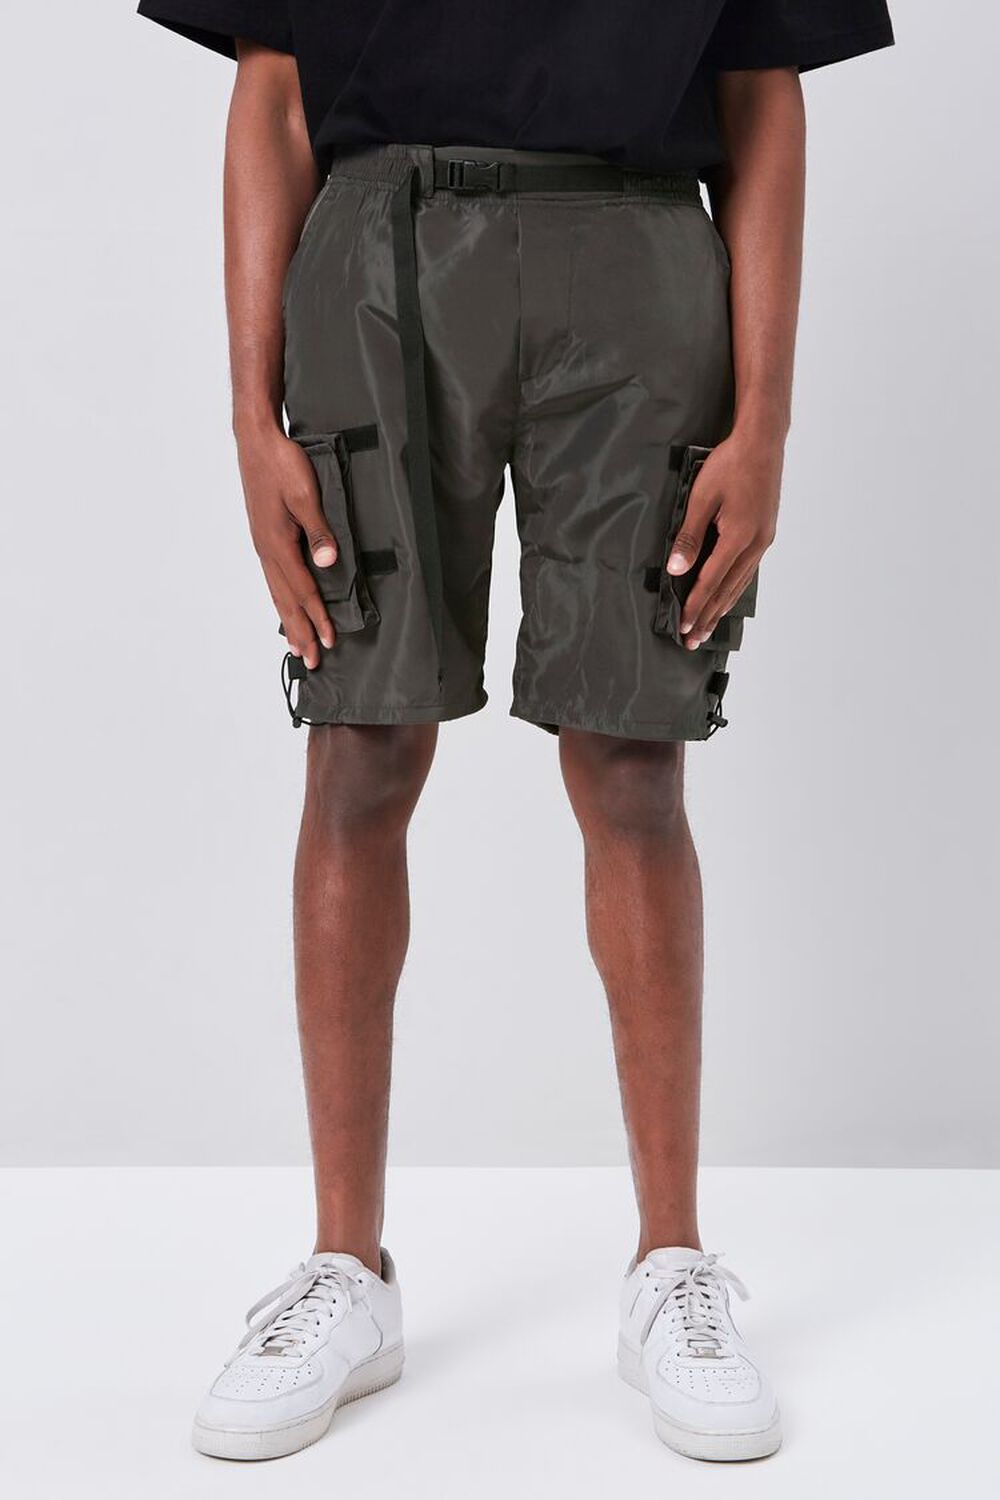 CHARCOAL Release-Buckle Belted Cargo Shorts, image 2